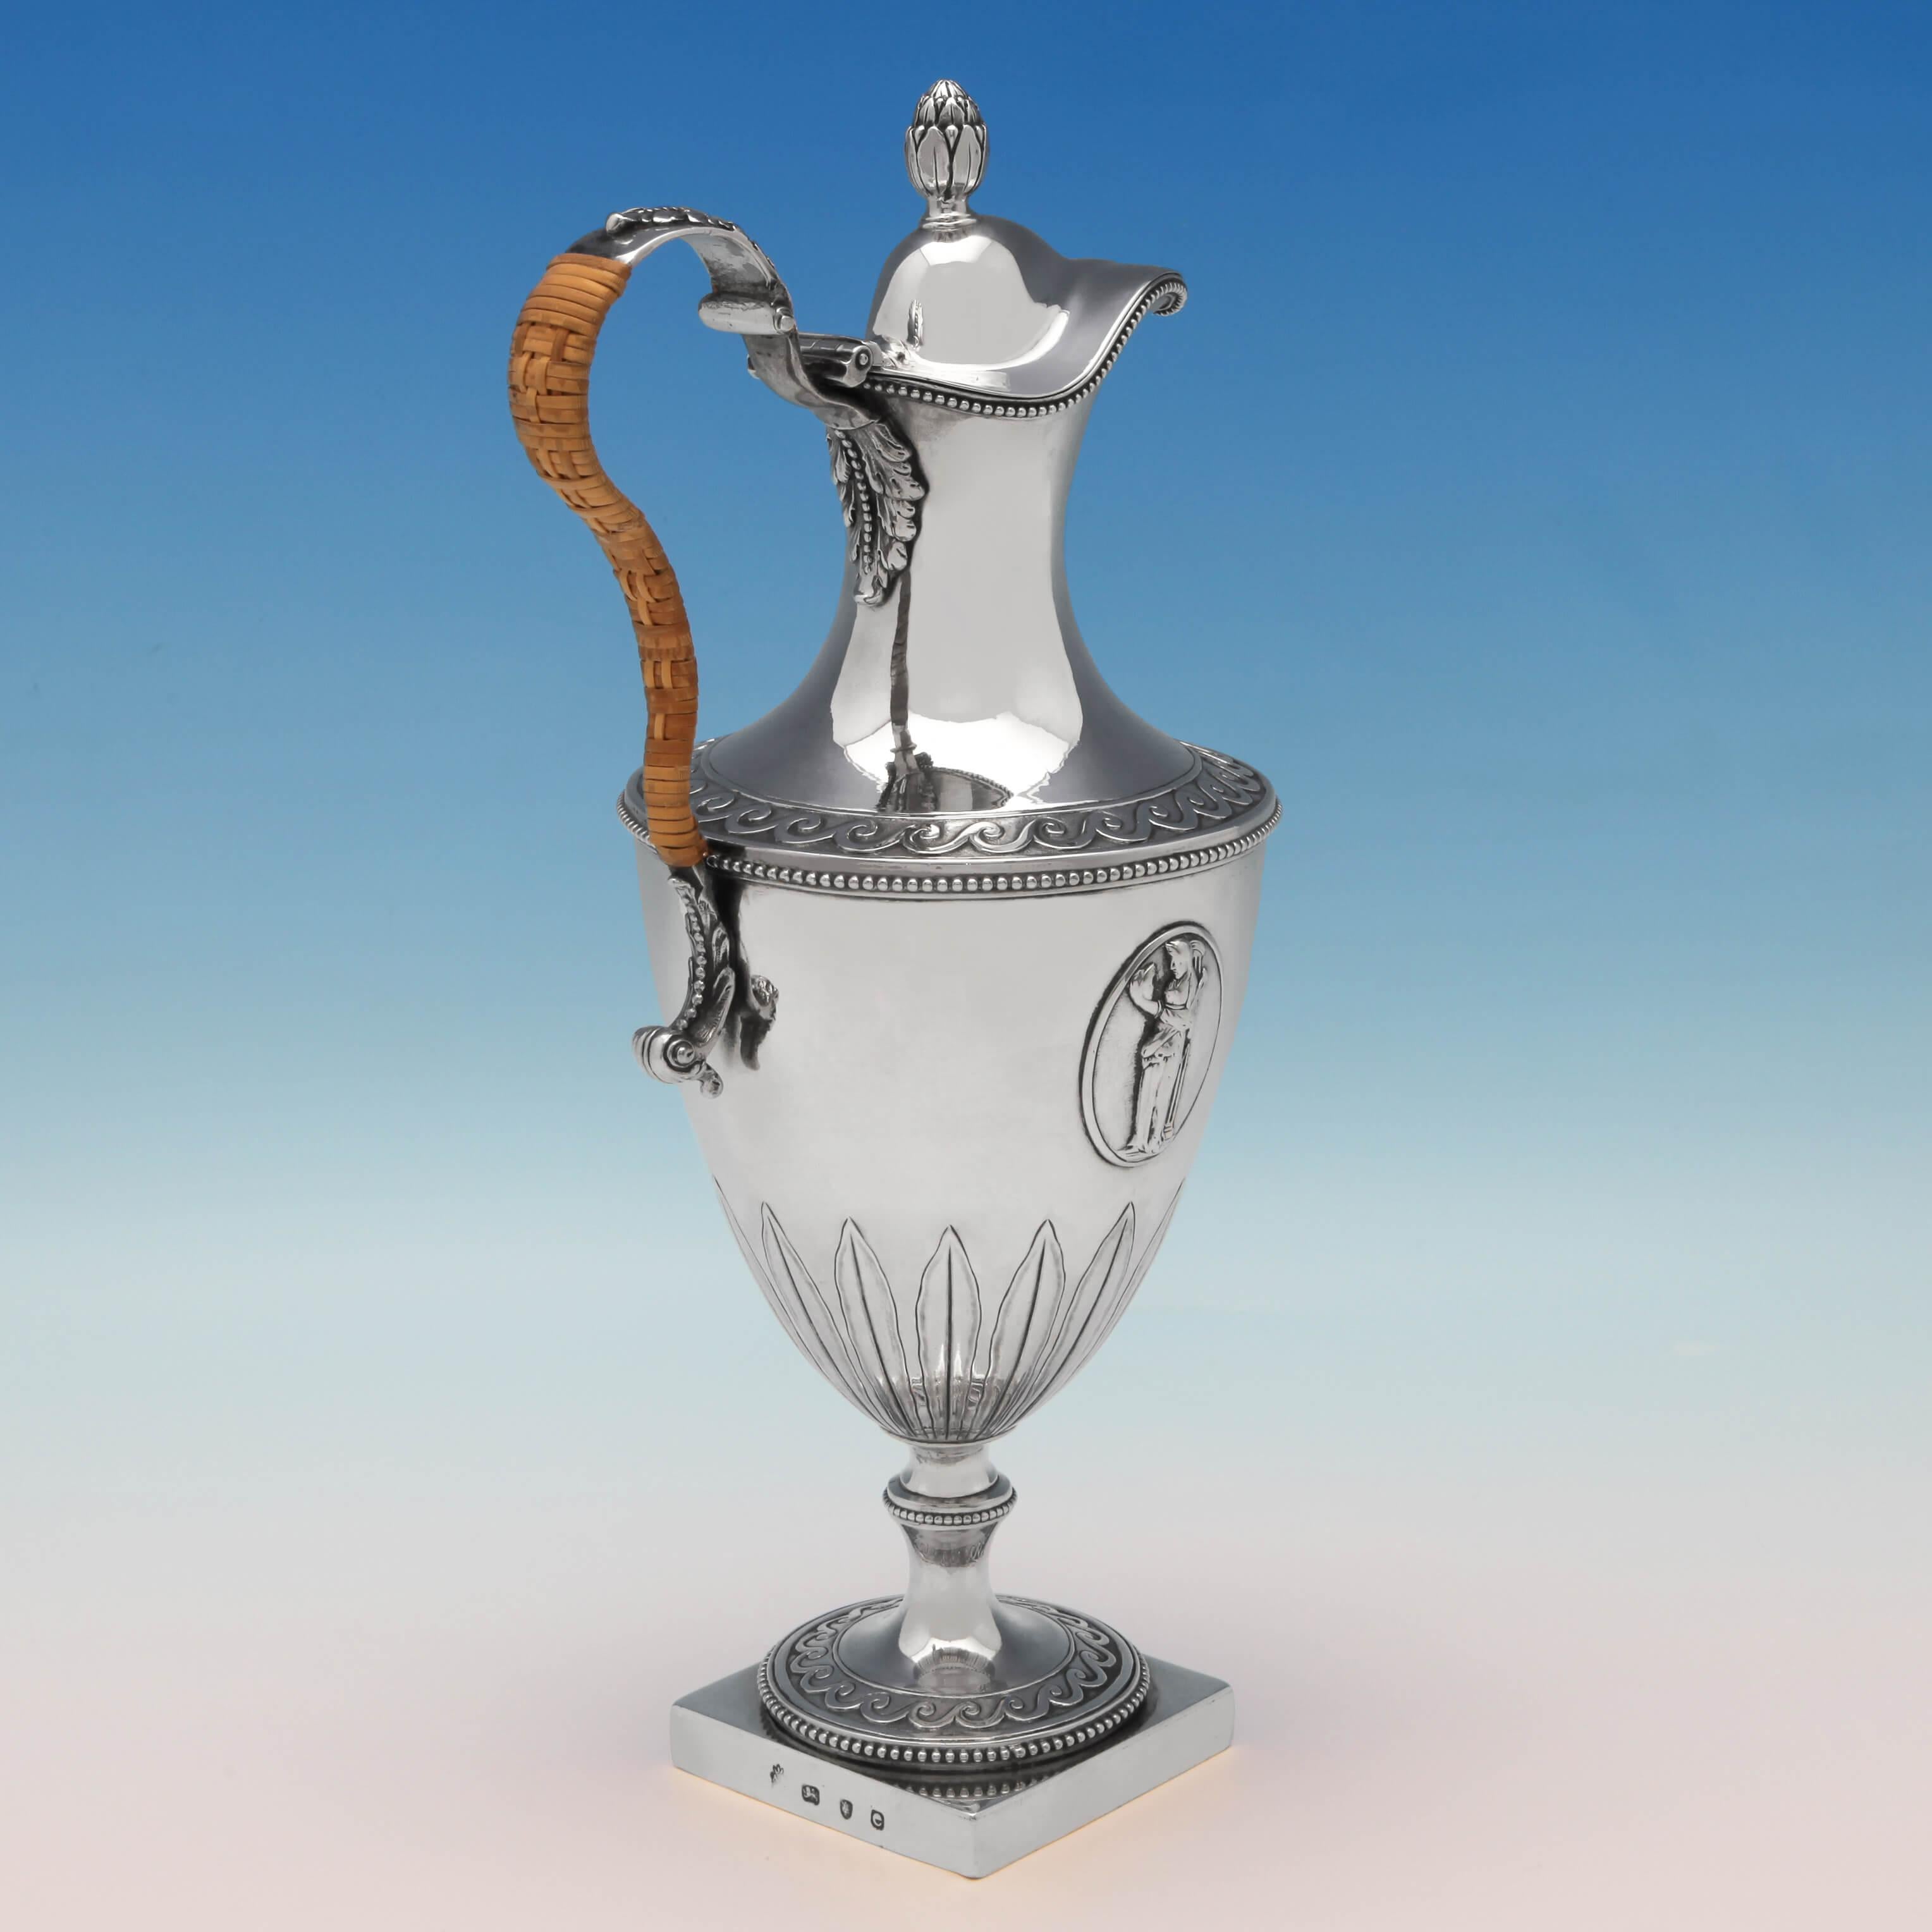 Hallmarked in London in 1780 by Fogelberg & Gilbert, this handsome, George III, antique sterling silver wine ewer or water jug, features neoclassical decoration, bead borders and a wicker handle. The wine jug measures 12